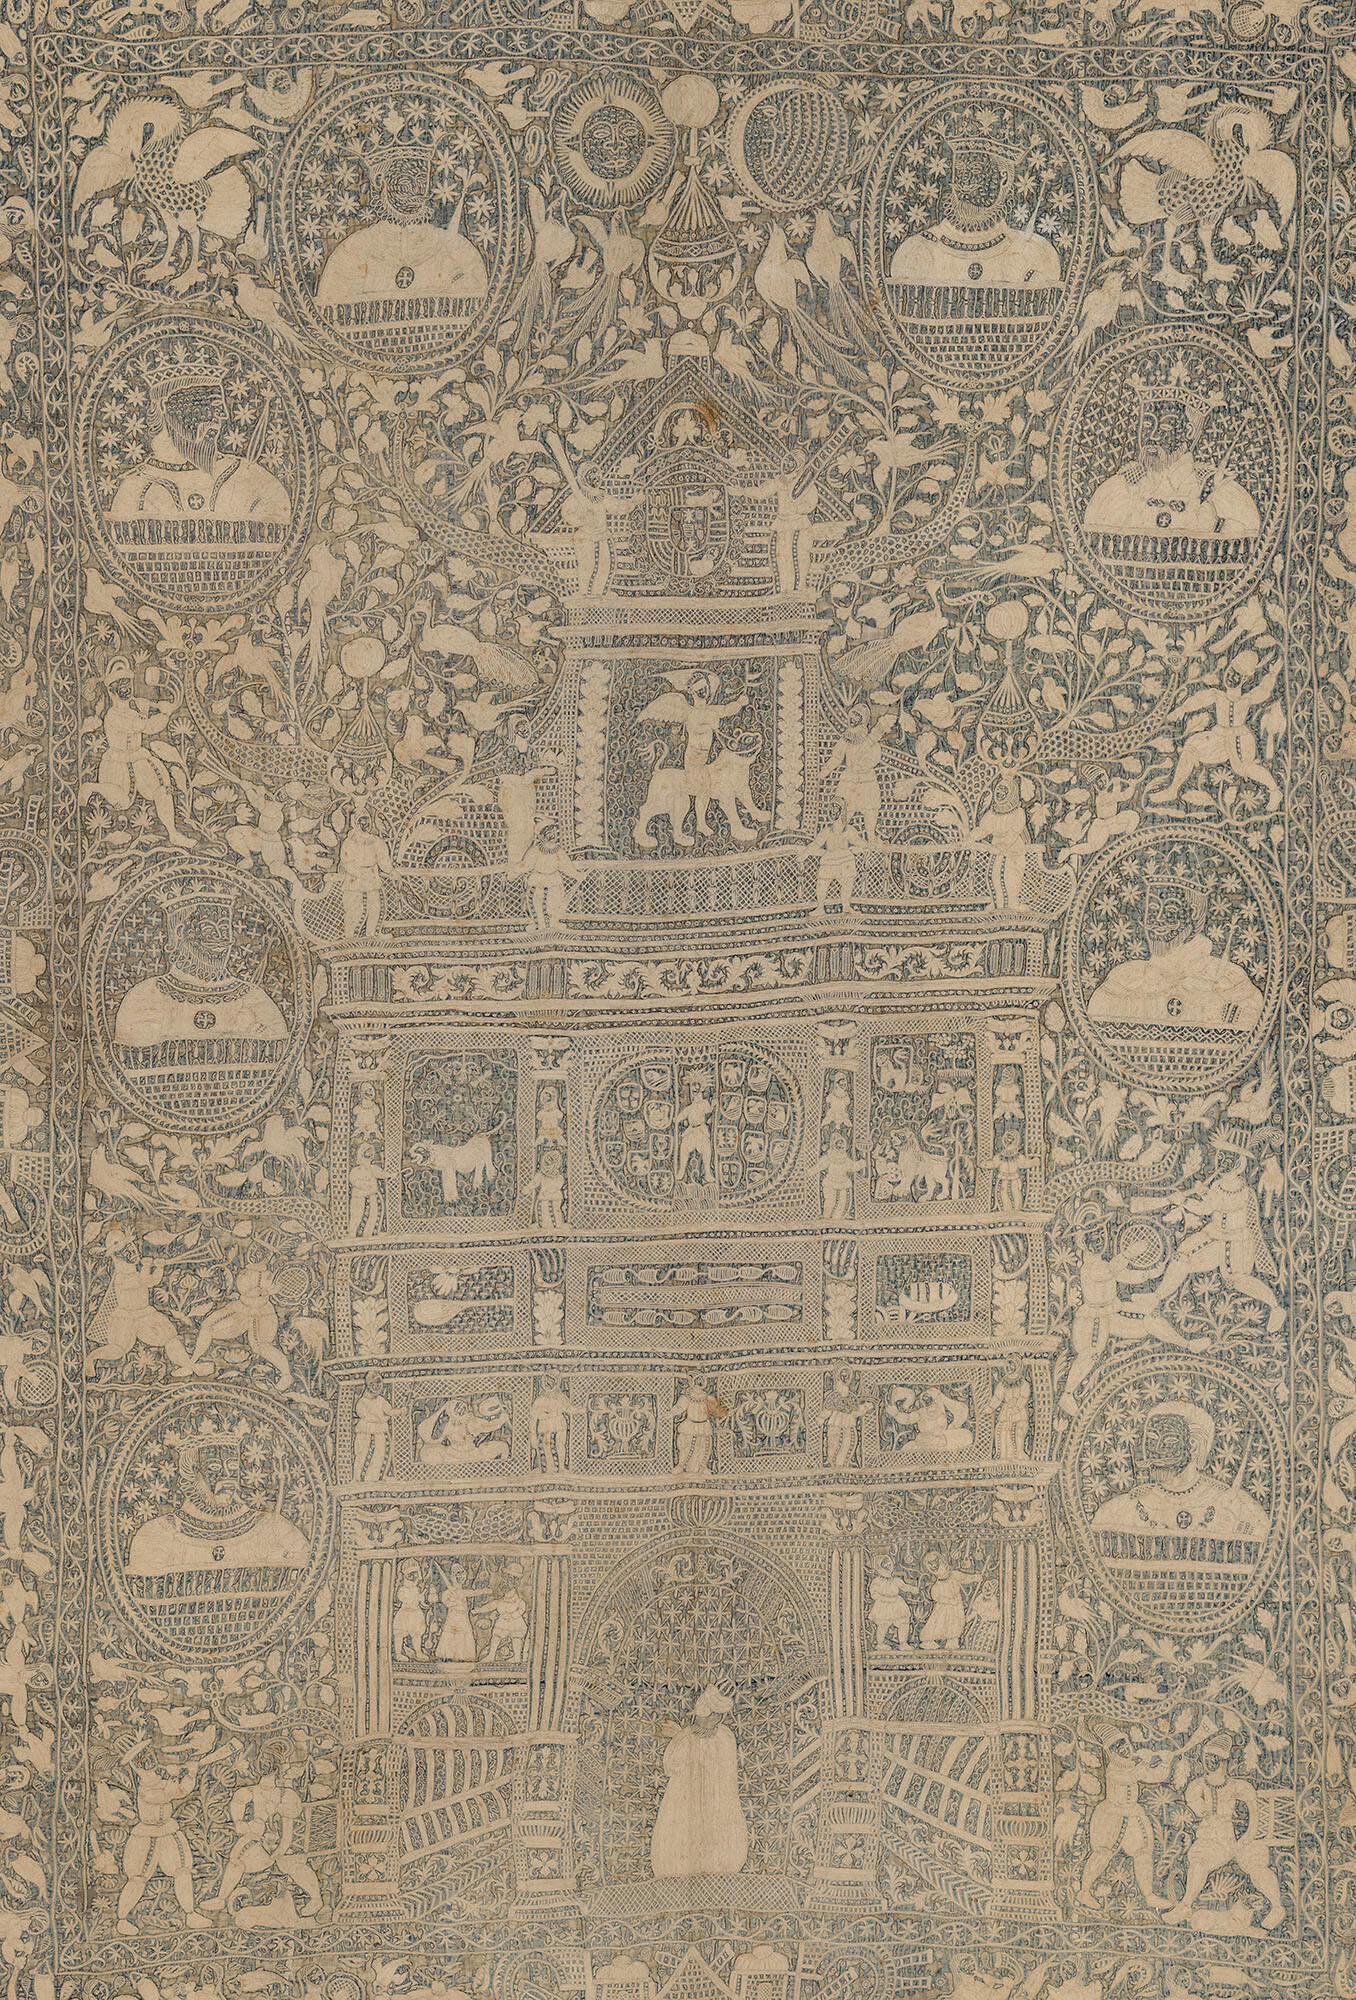 A detail of an embroidered wall hanging in the Gardner Museum of cream colored thread on a dark blue background. An arch with three openings has decorative features including human figures and animals.